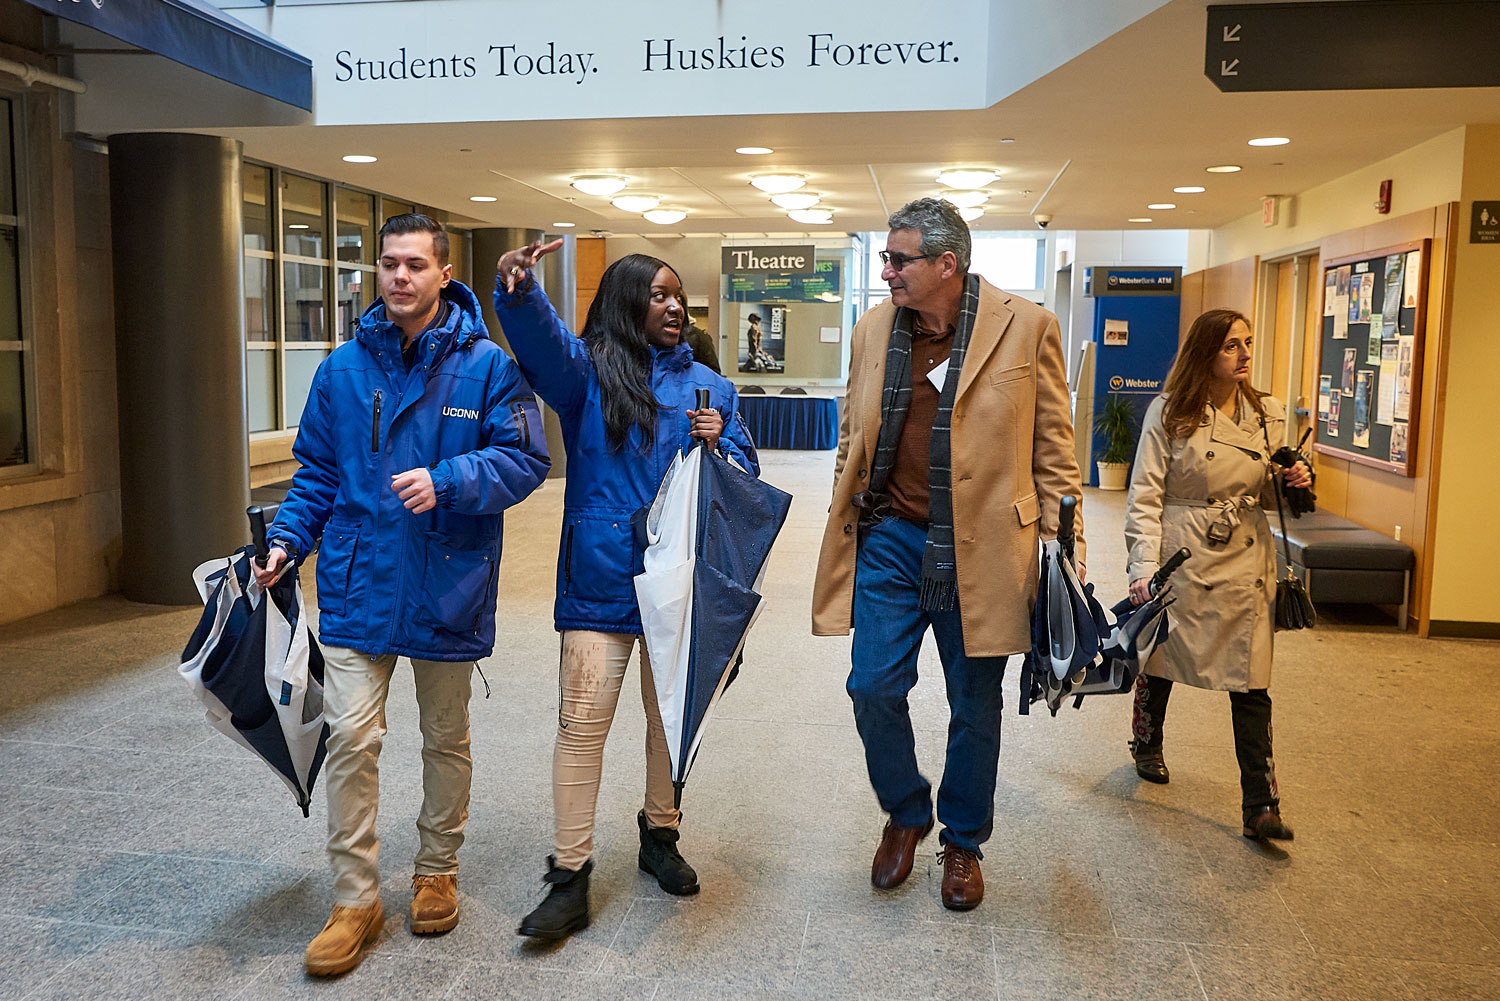 Thomas Katsouleas, president designate,takes a tour of campus with Lodewick Visitors Center staff